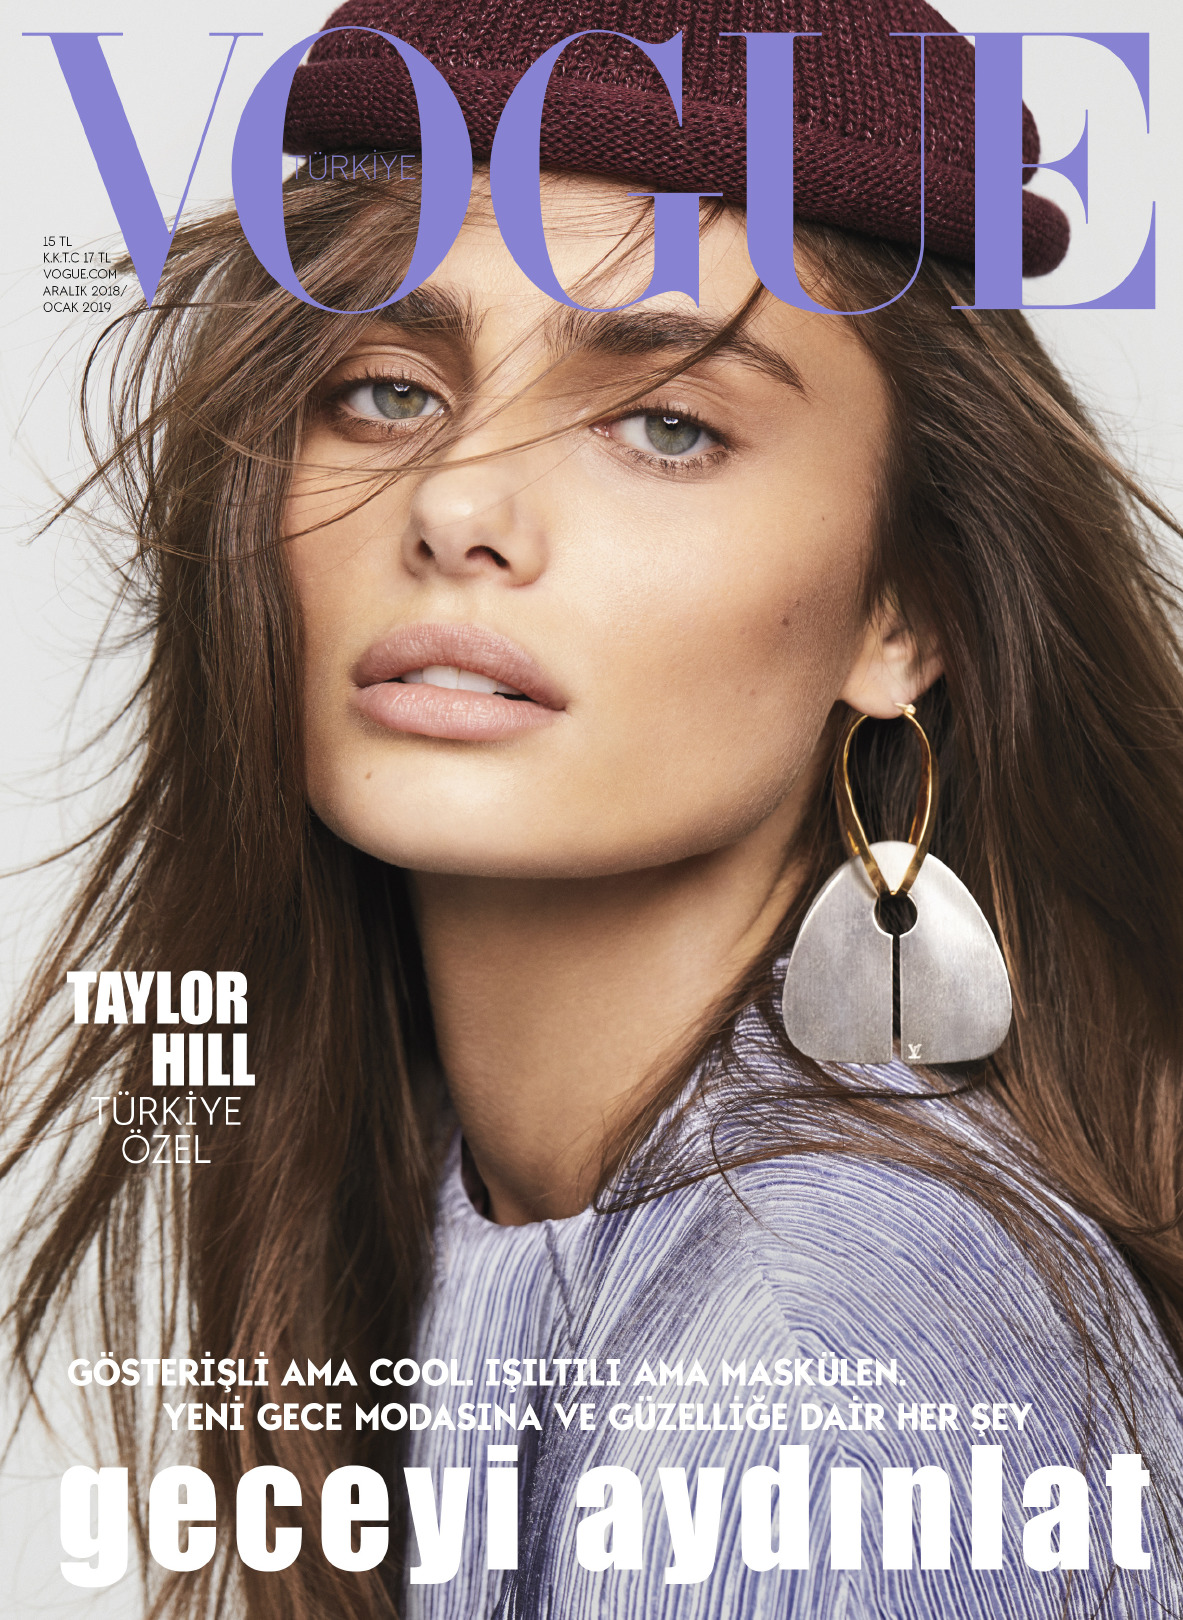 Taylor Hill in Vogue – VOGUEGRAPHY